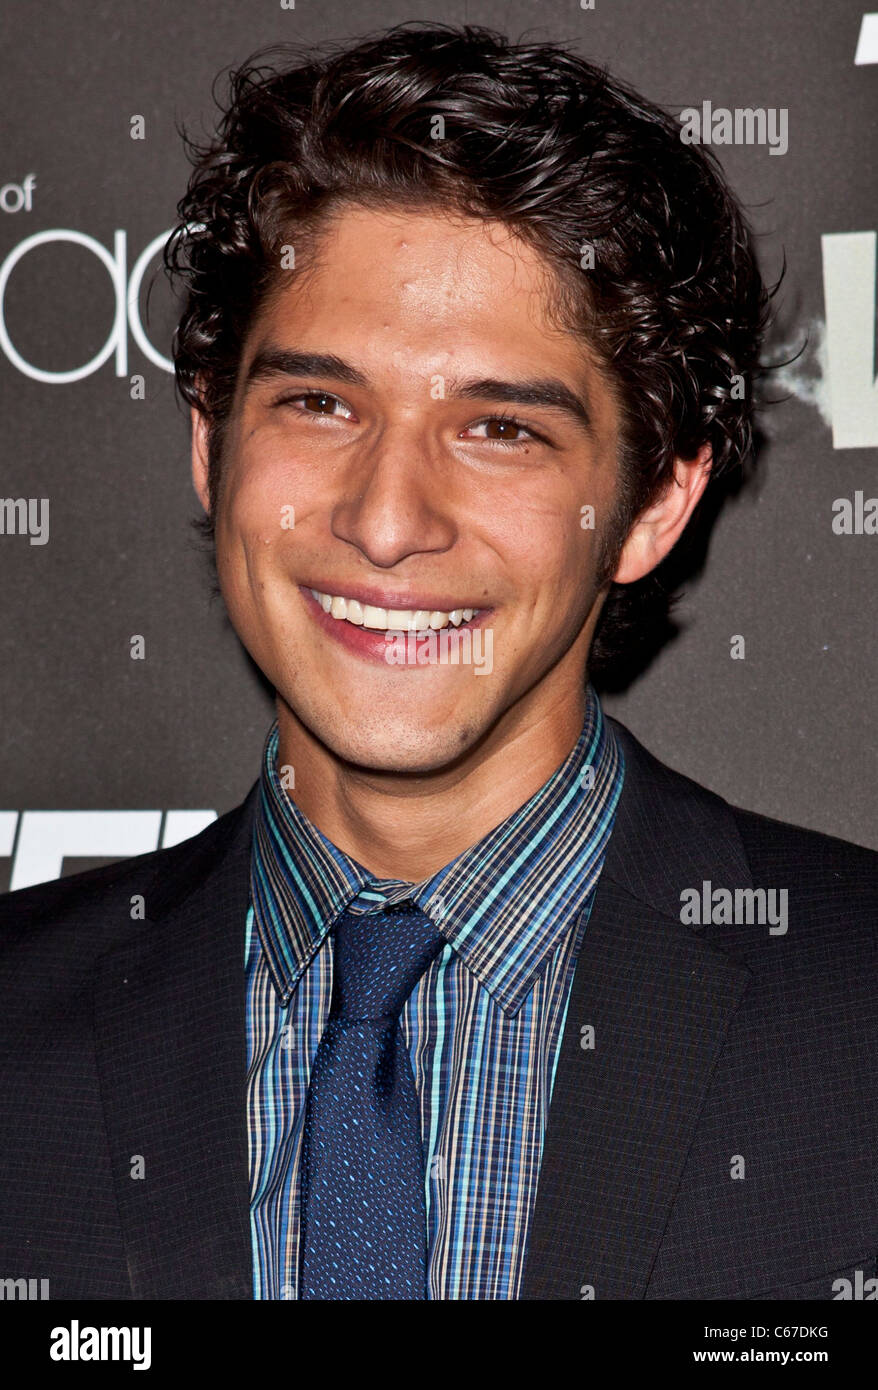 Tyler Posey at arrivals for TEEN WOLF Premiere Party, The Roosevelt Hotel, Los Angeles, CA May 25, 2011. Photo By: Emiley Schweich/Everett Collection Stock Photo